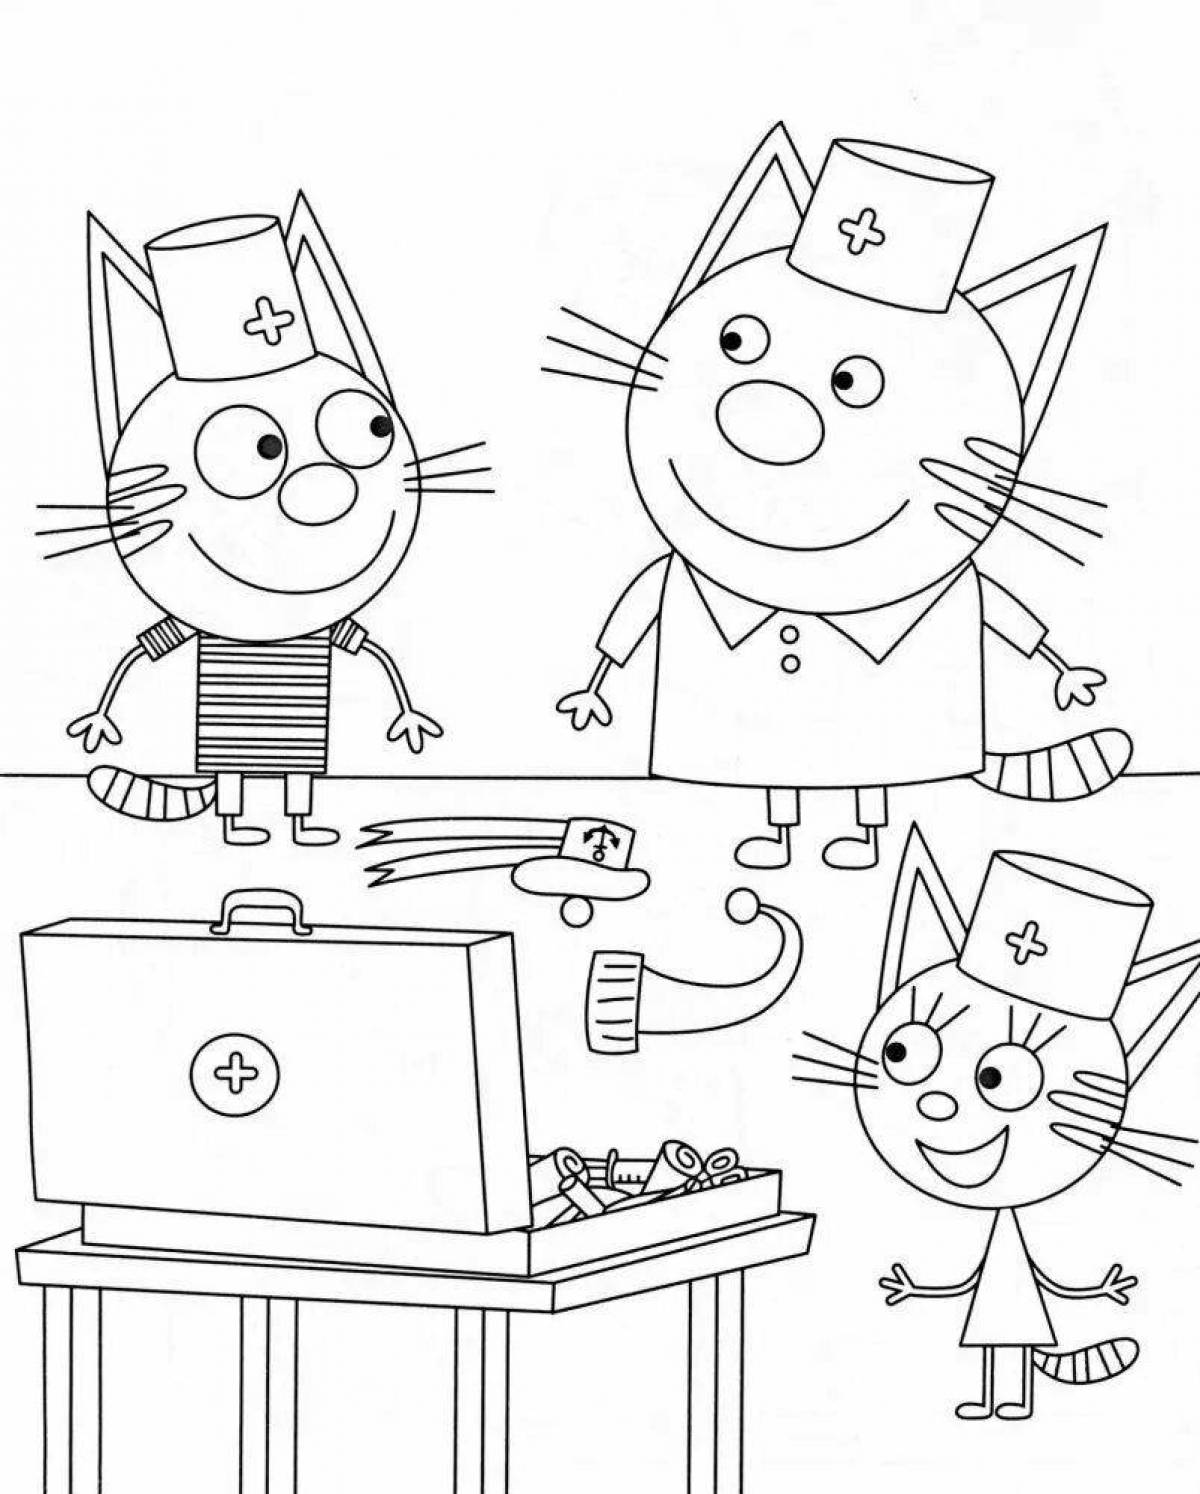 Turn on coloring 3 cats #4